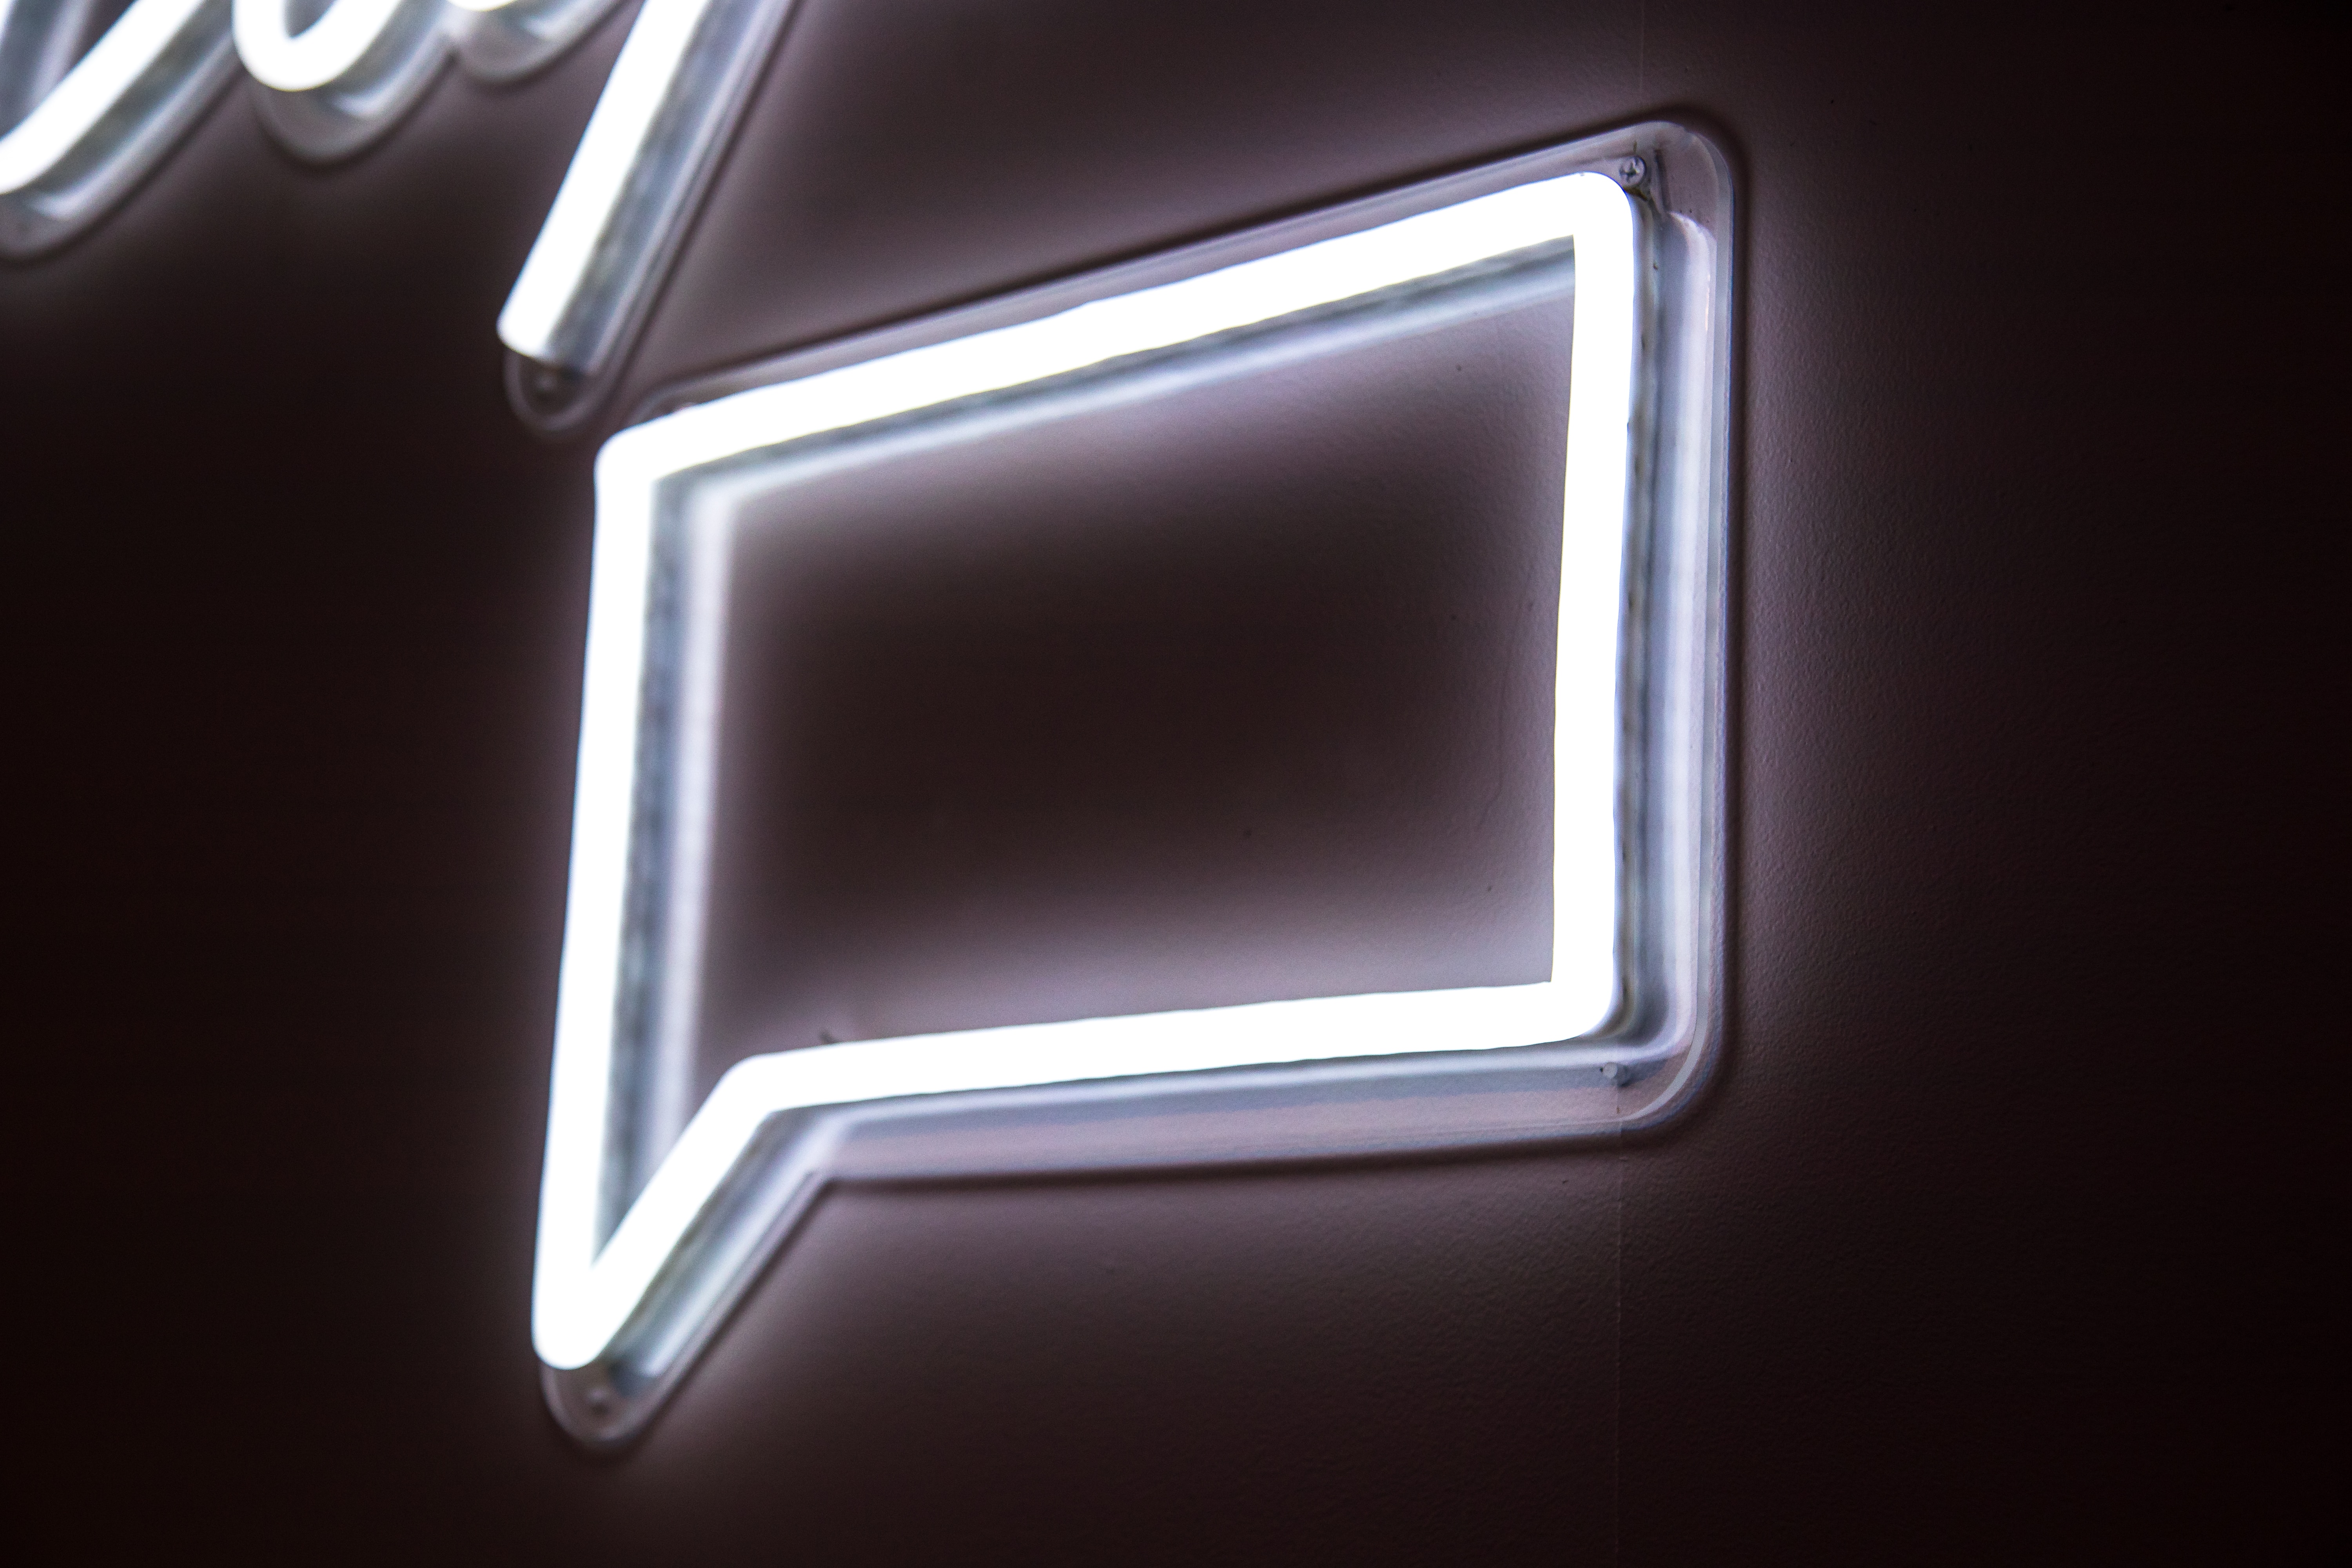 stock photo of a white neon sign in the shape of a speech bubble